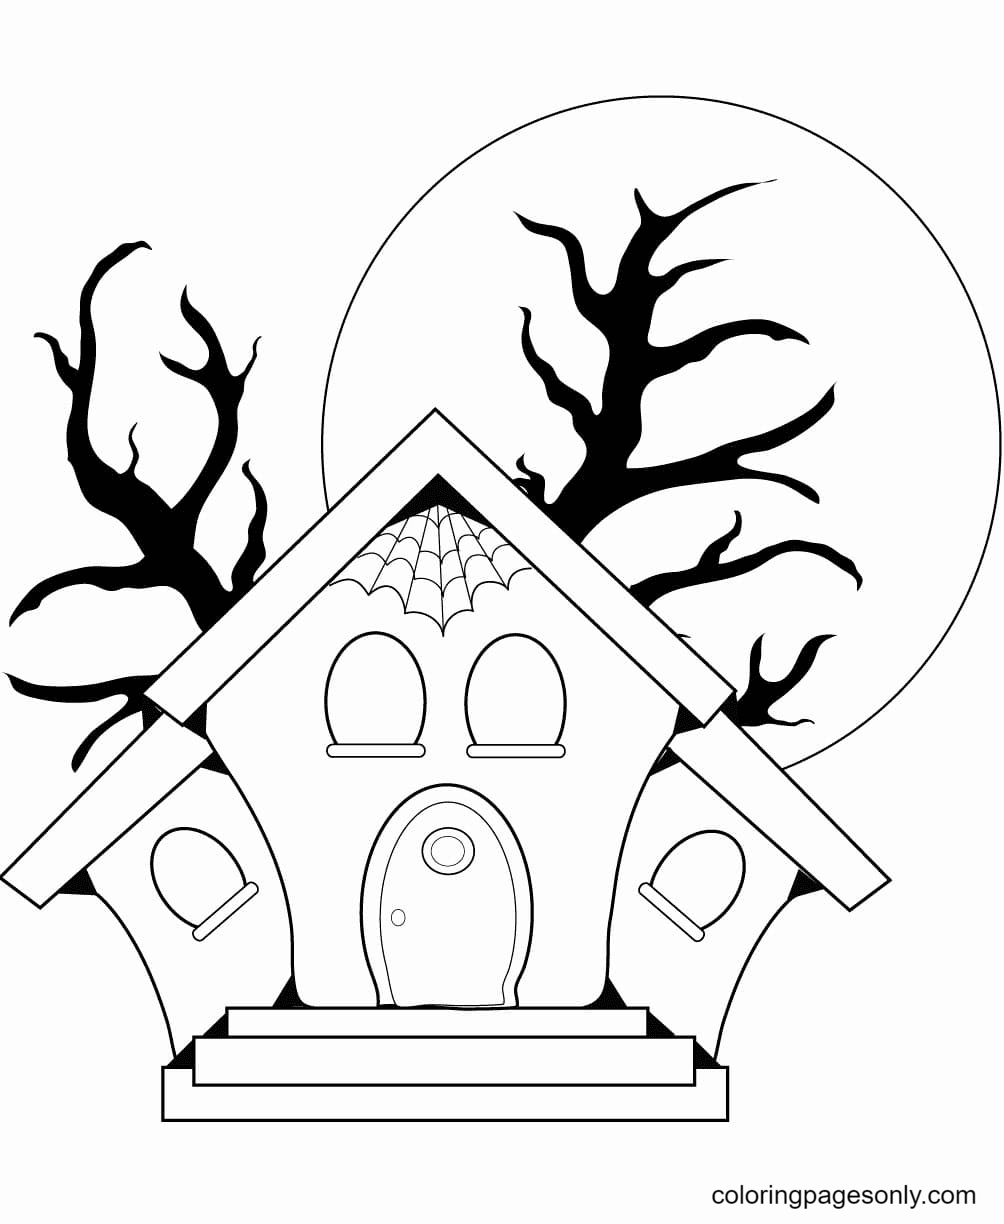 Printable Haunted House from Haunted House